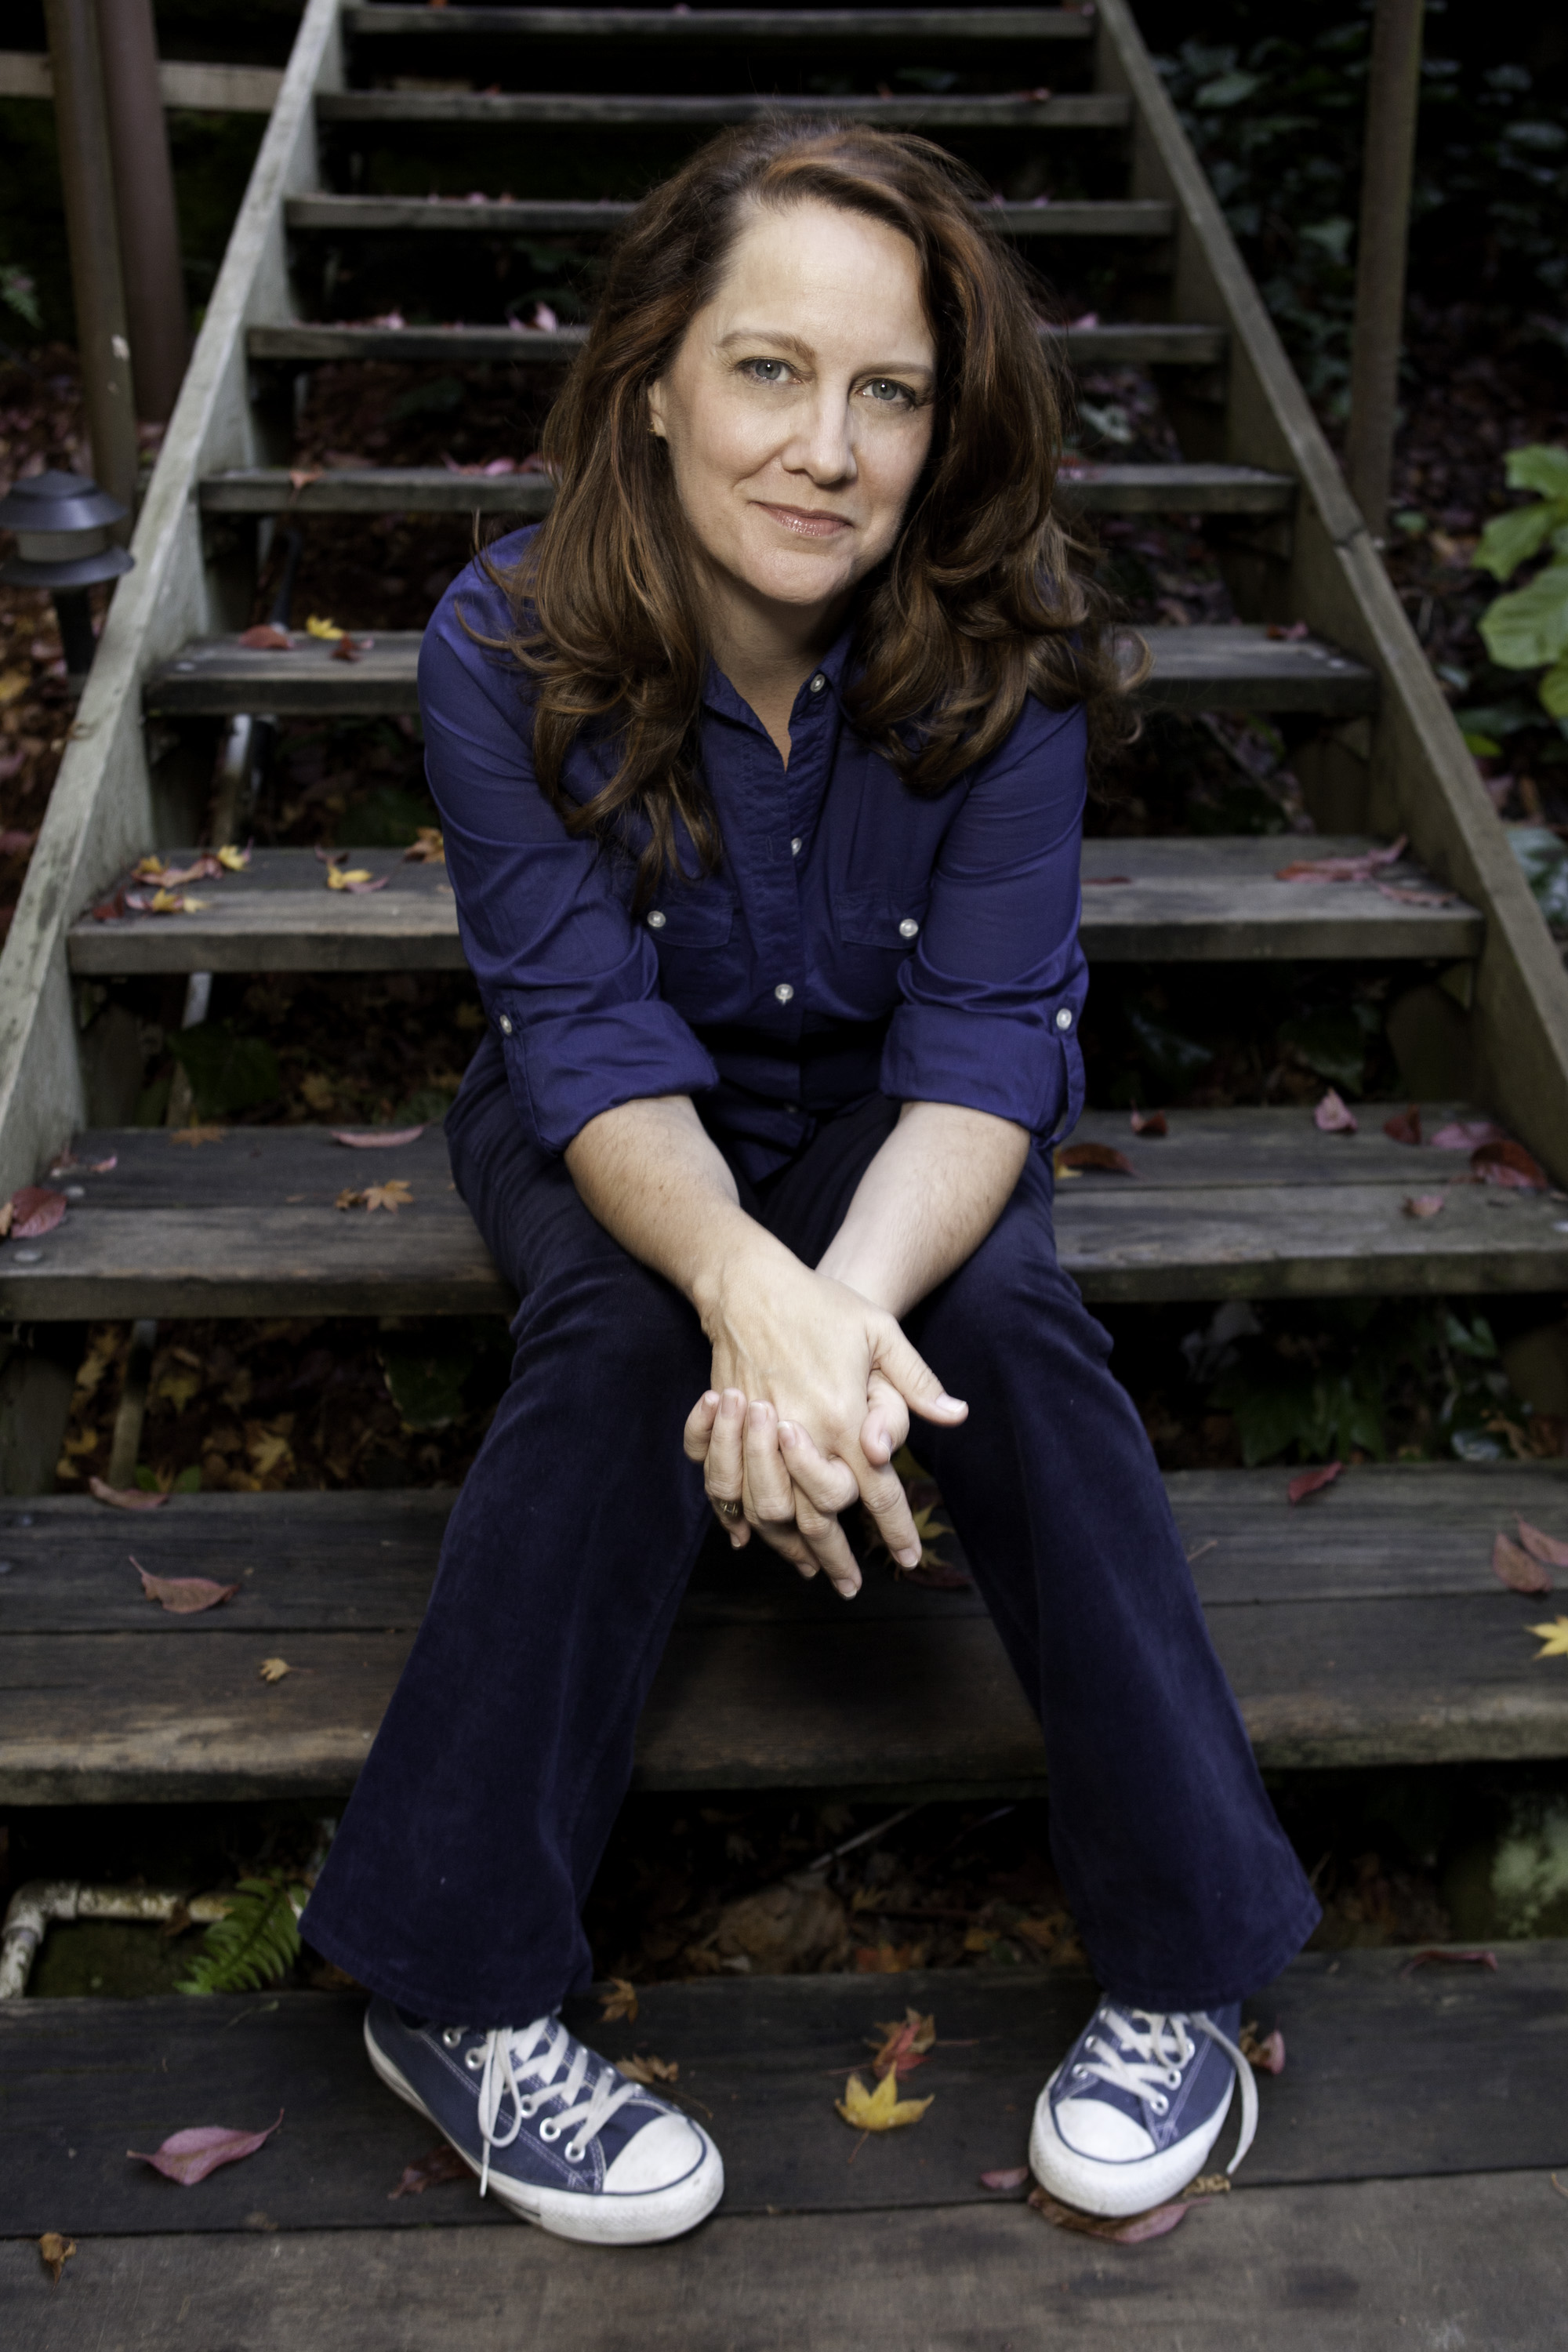 Kelly Carlin joins the 2015 Lucille Ball Comedy Festival